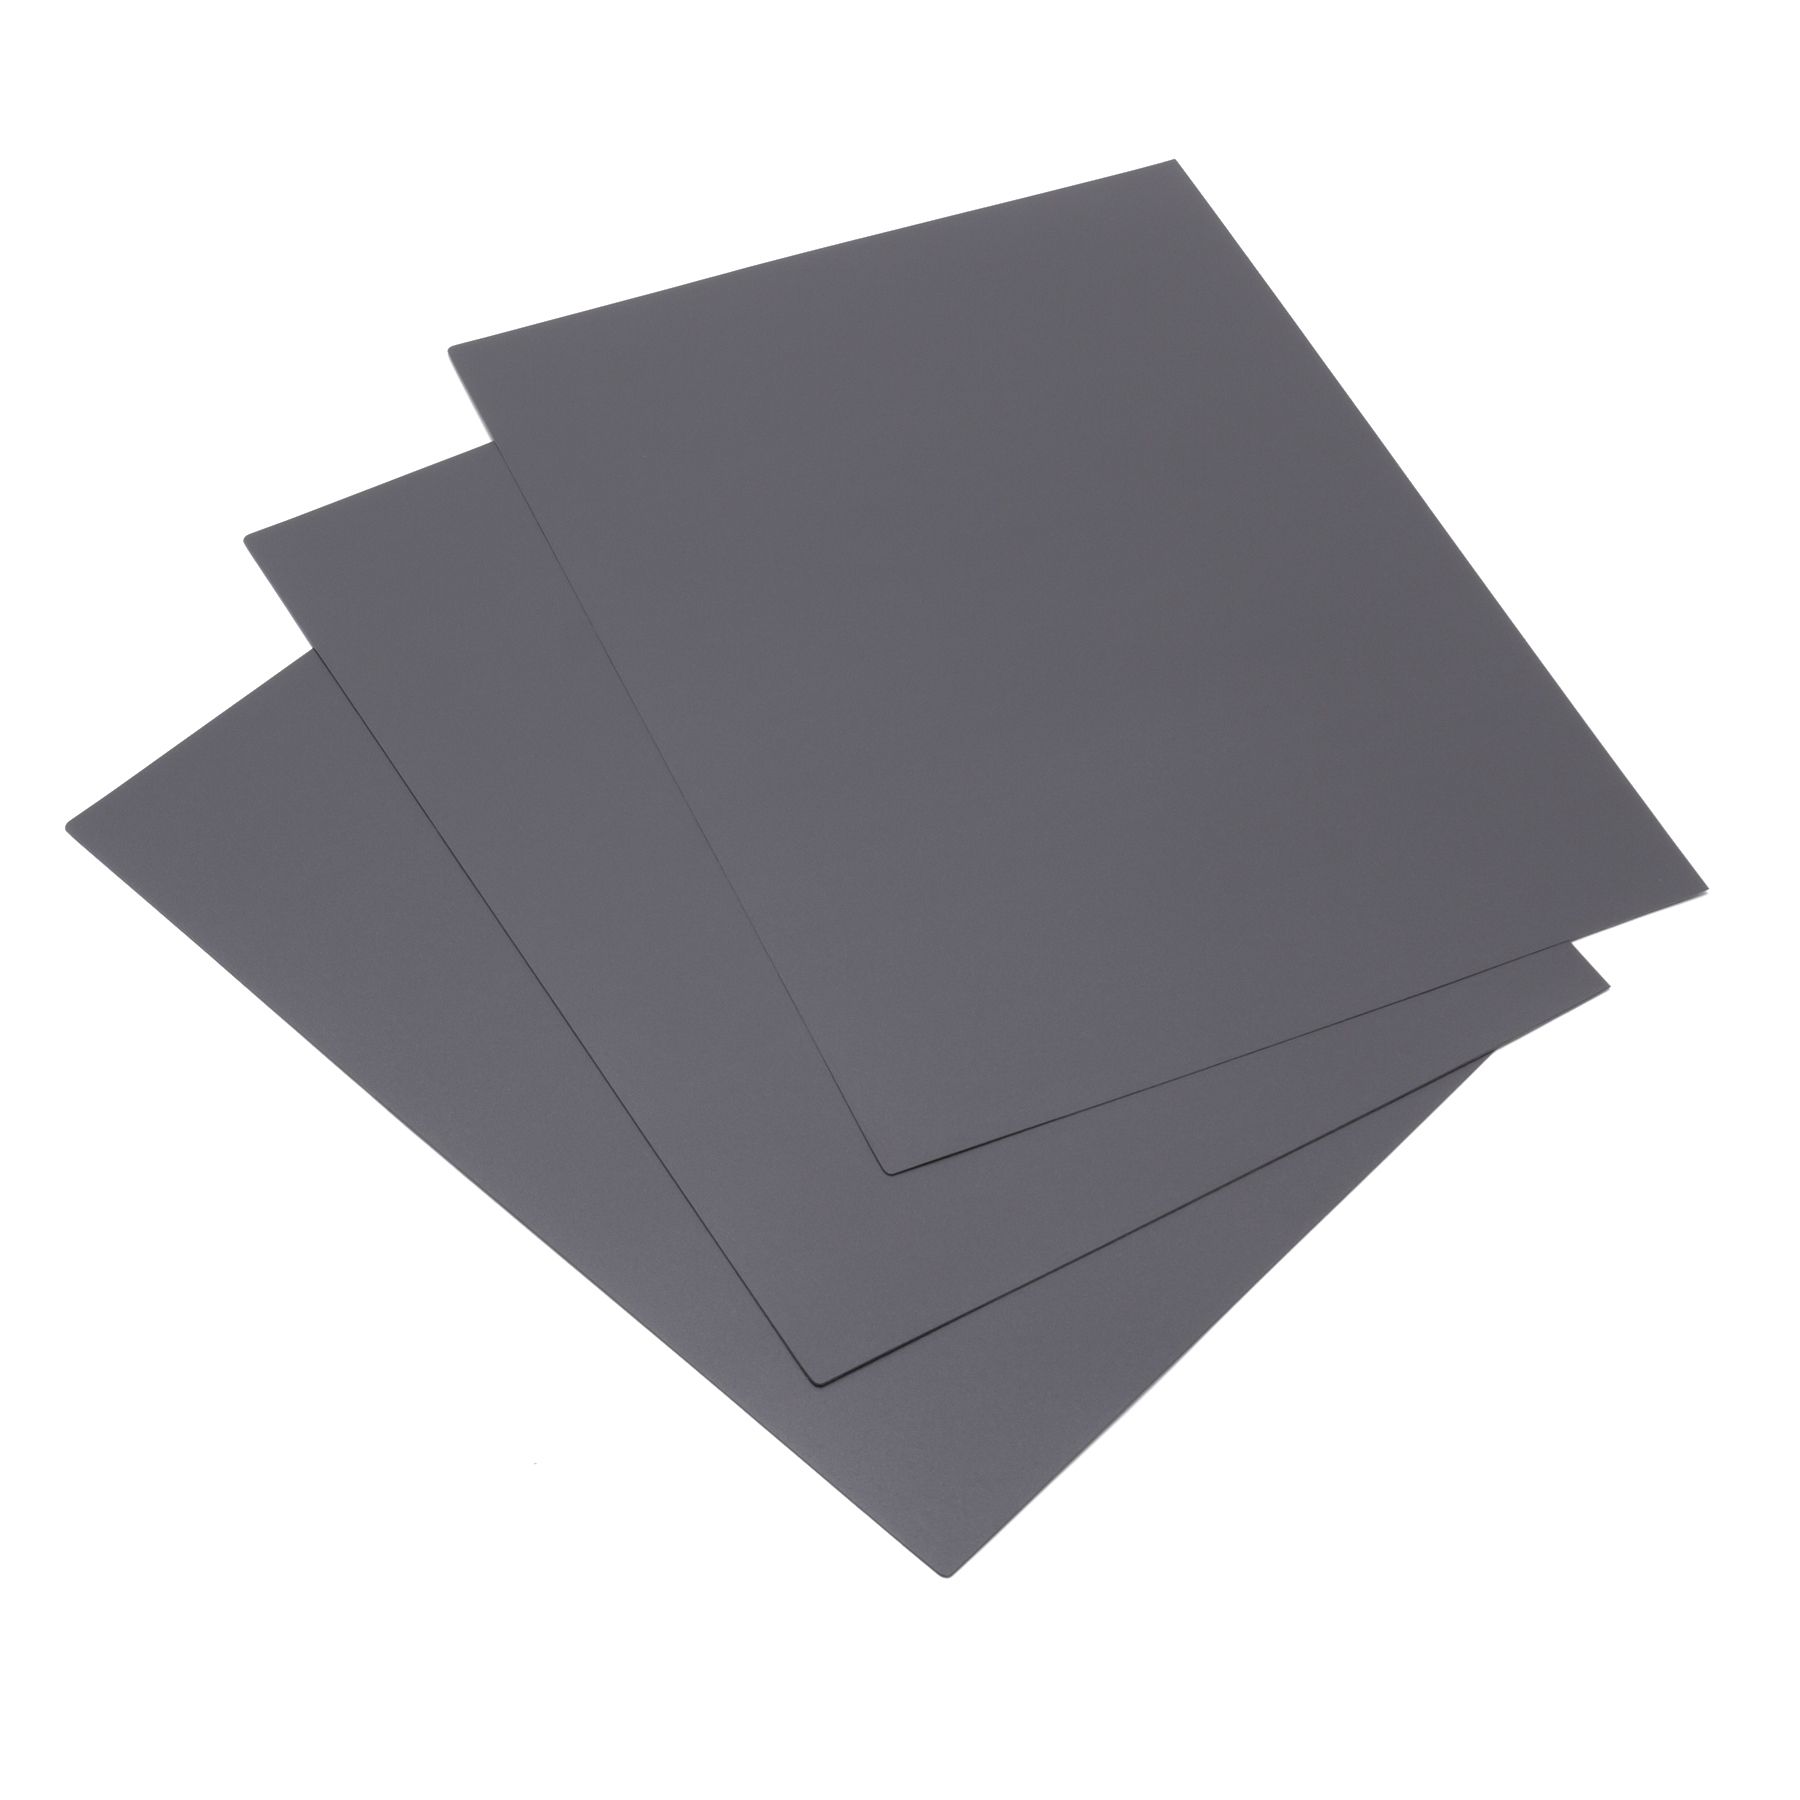 8.75" x 11.25" Medium Gray Poly Matte Covers (50 Pack) - Clearance Sale (Discontinued)